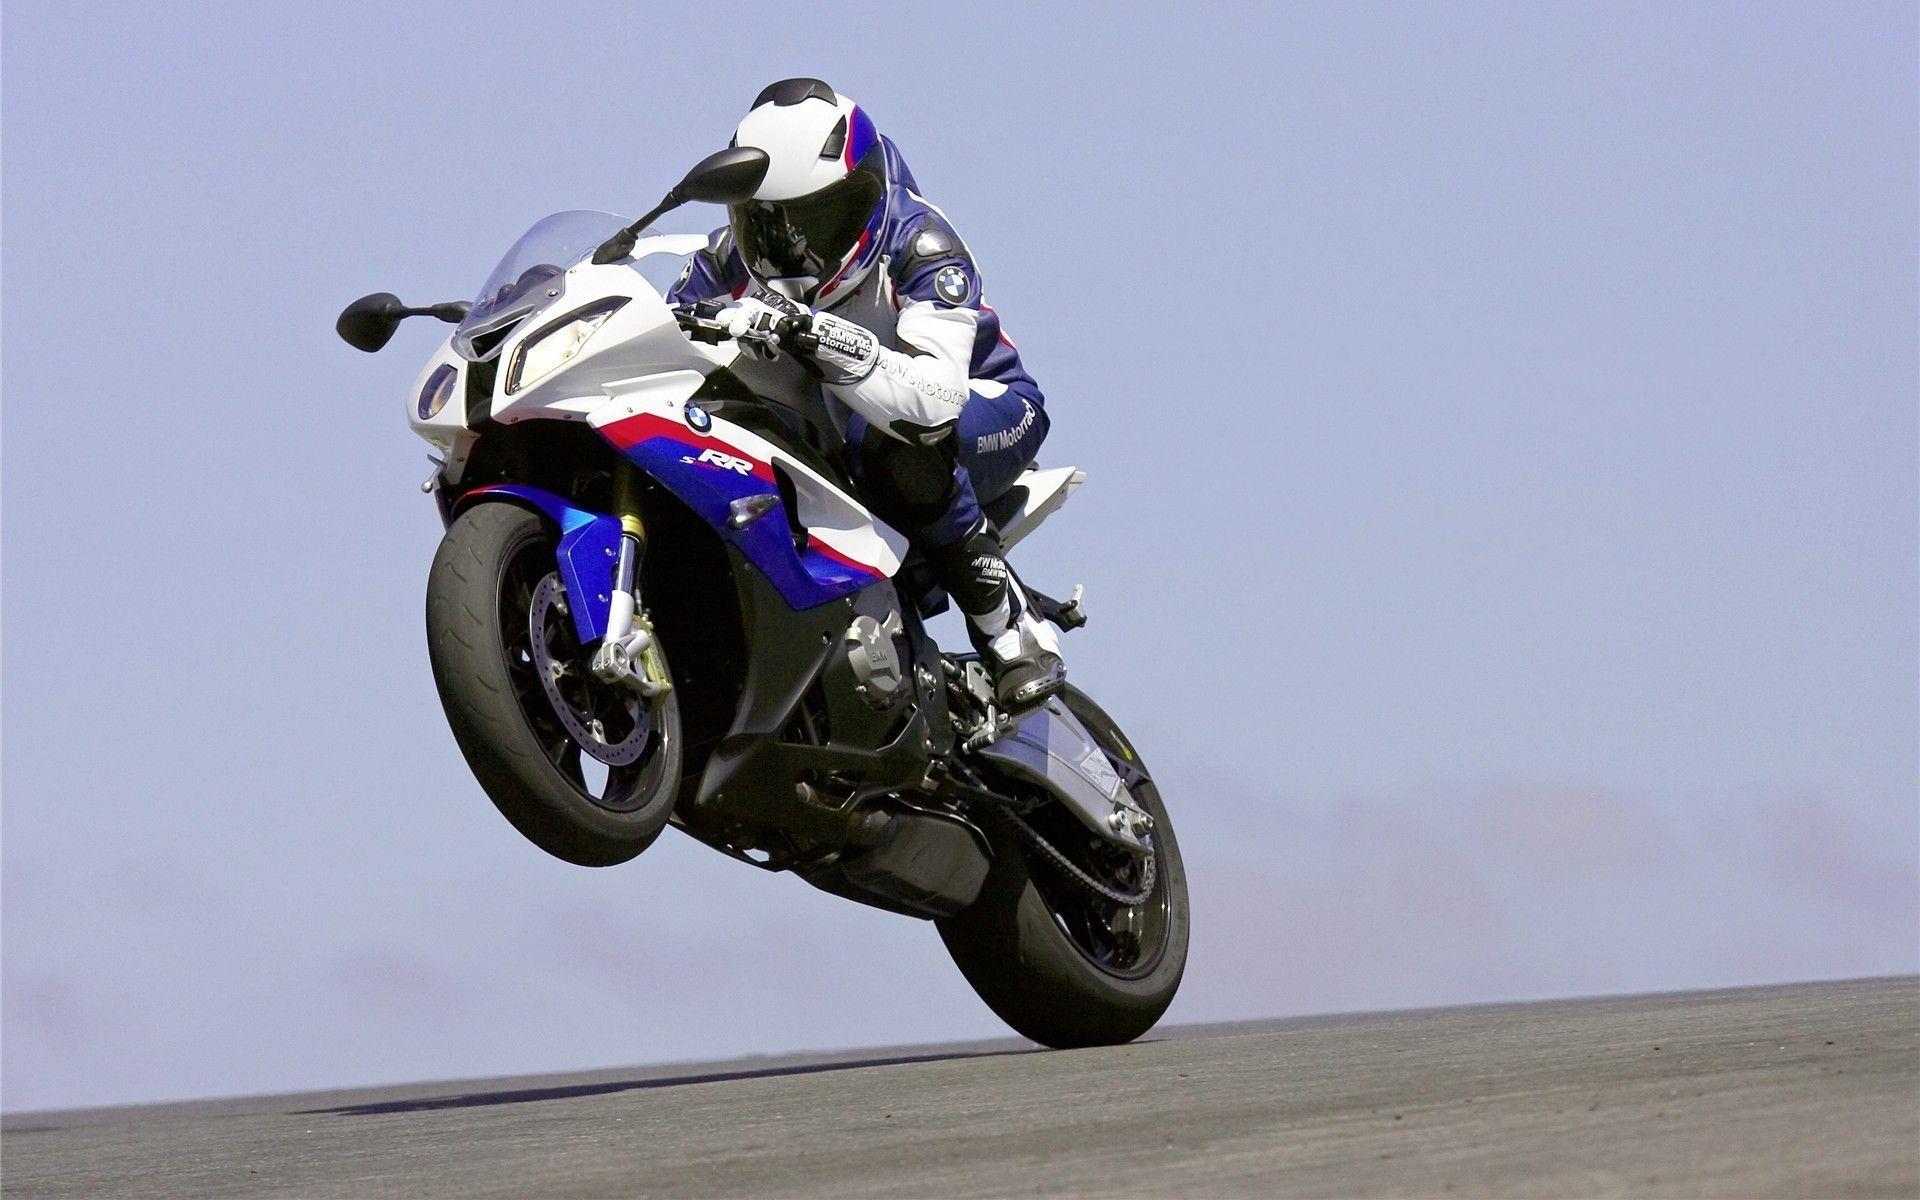 Racer on wheelie BMW S 1000 RR wallpaper and image